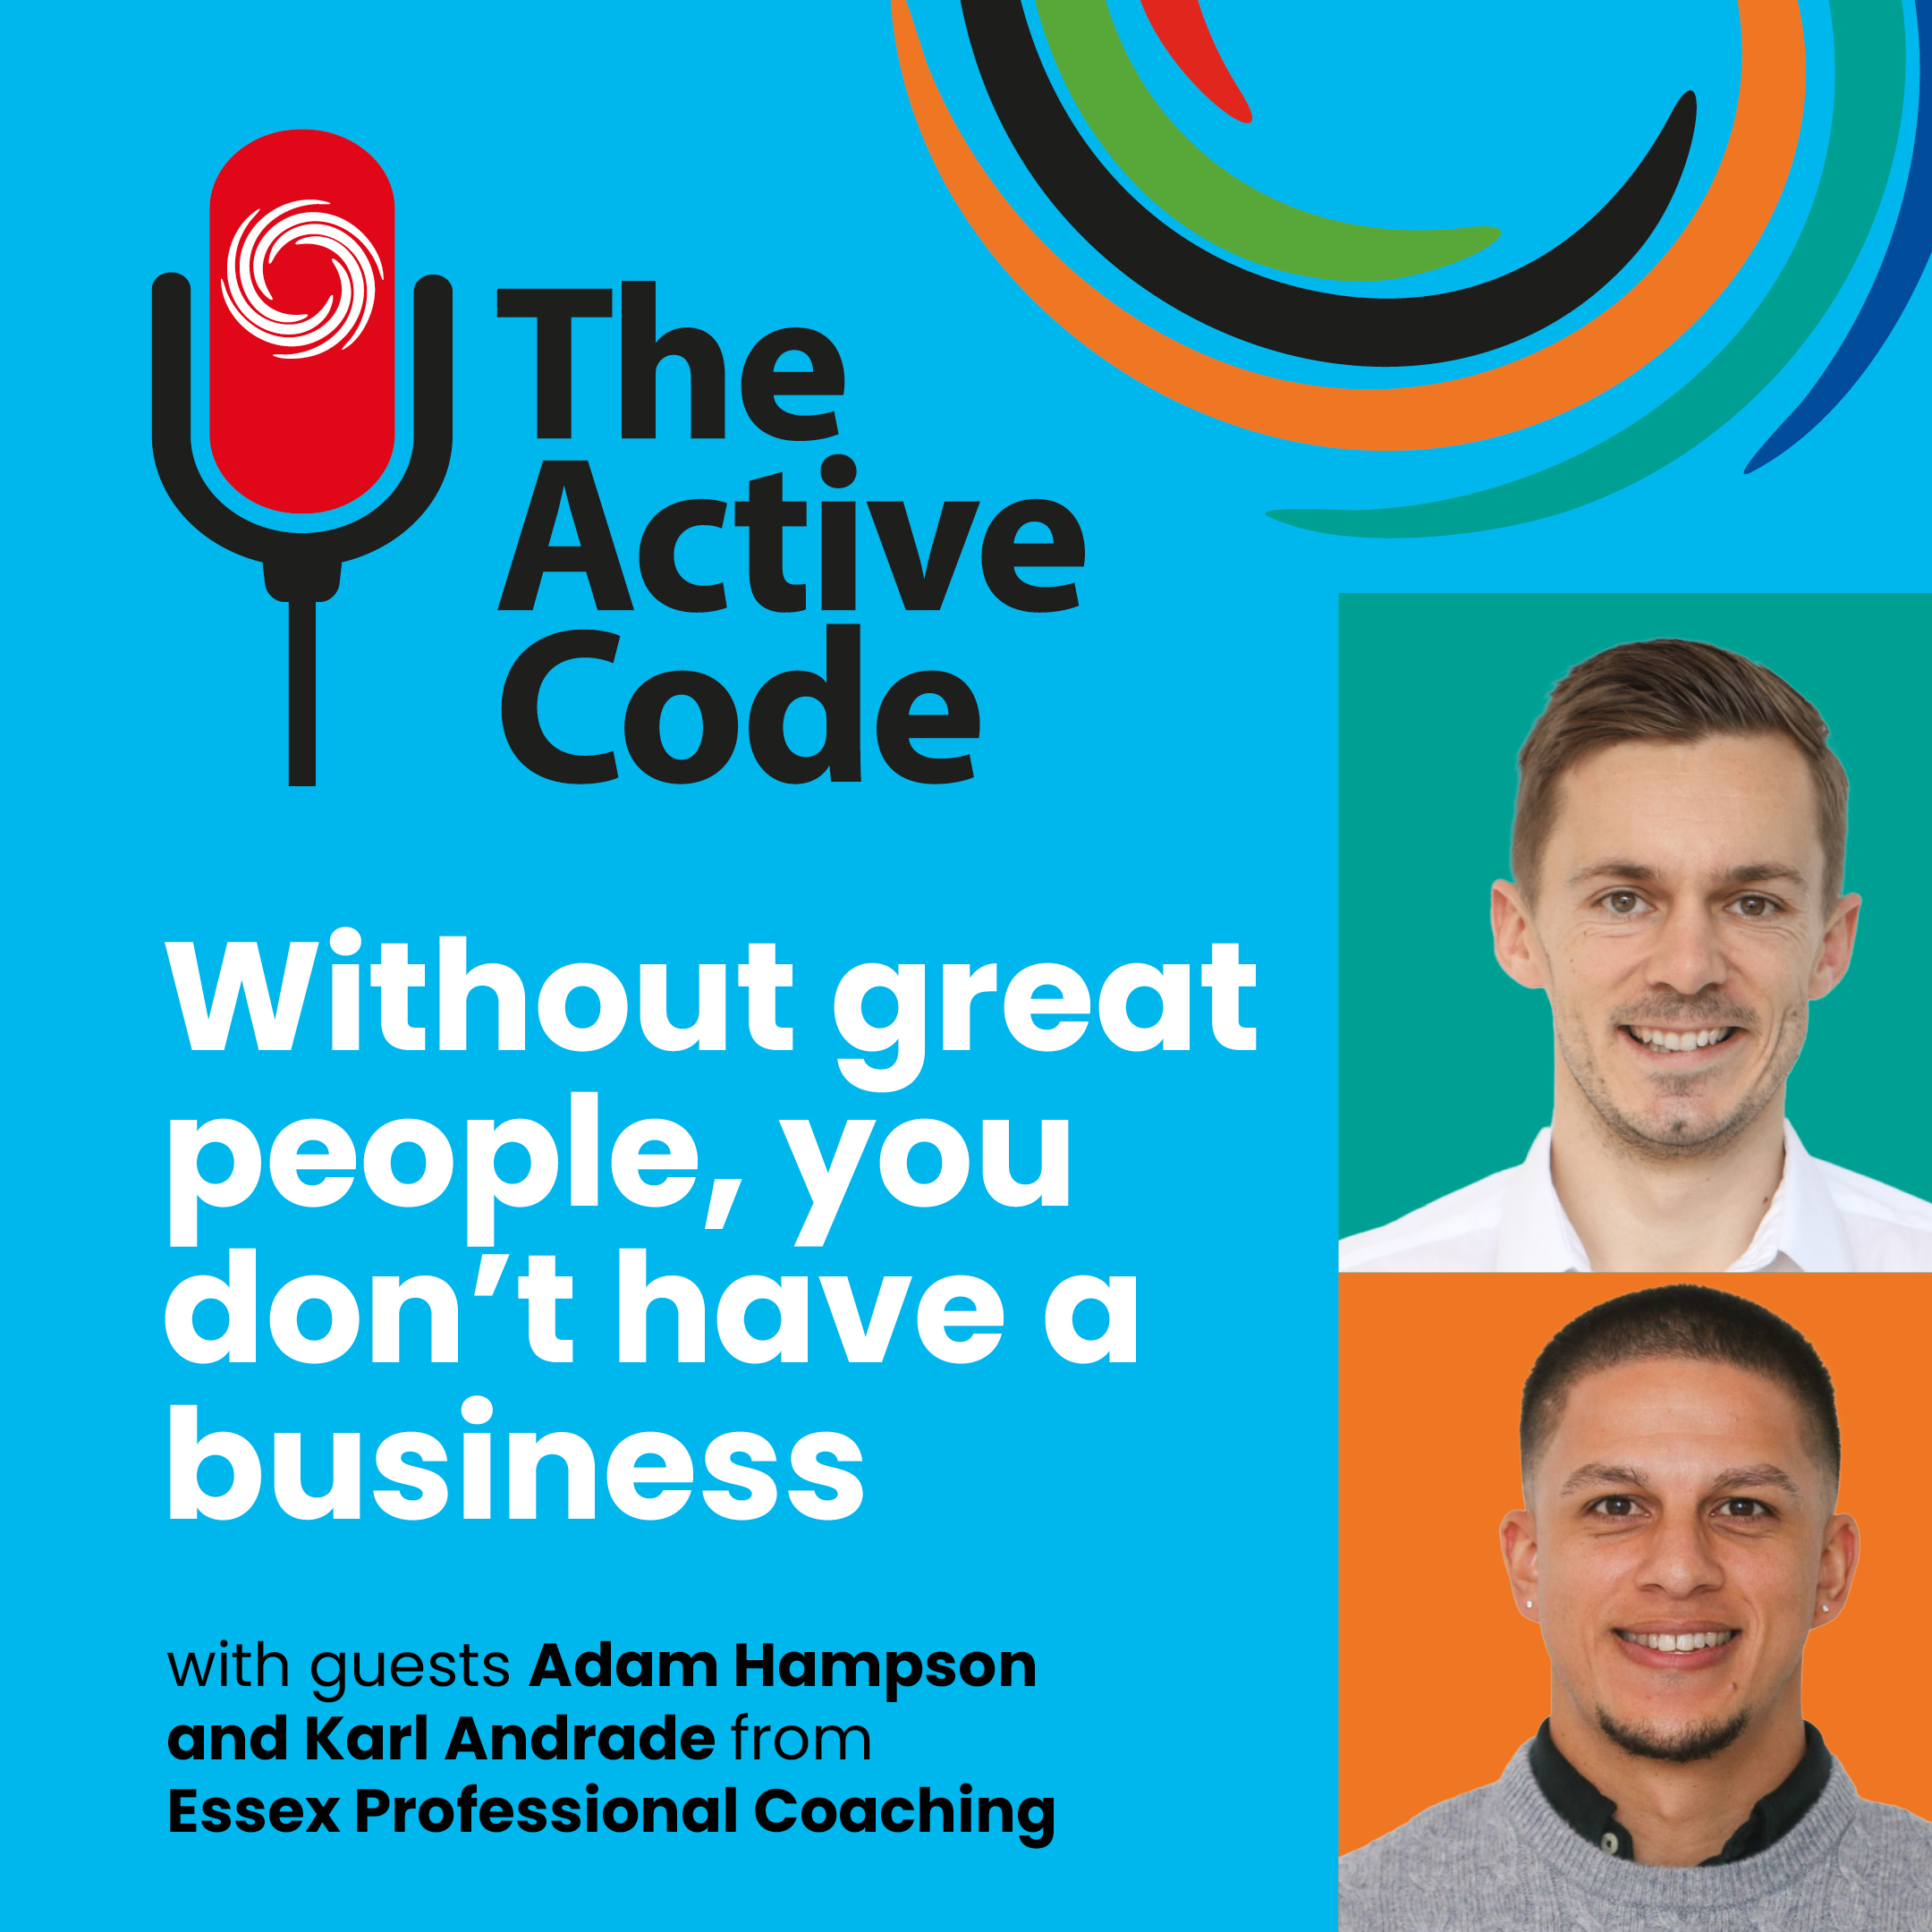 The Active Code – Without great people, you don’t have a business